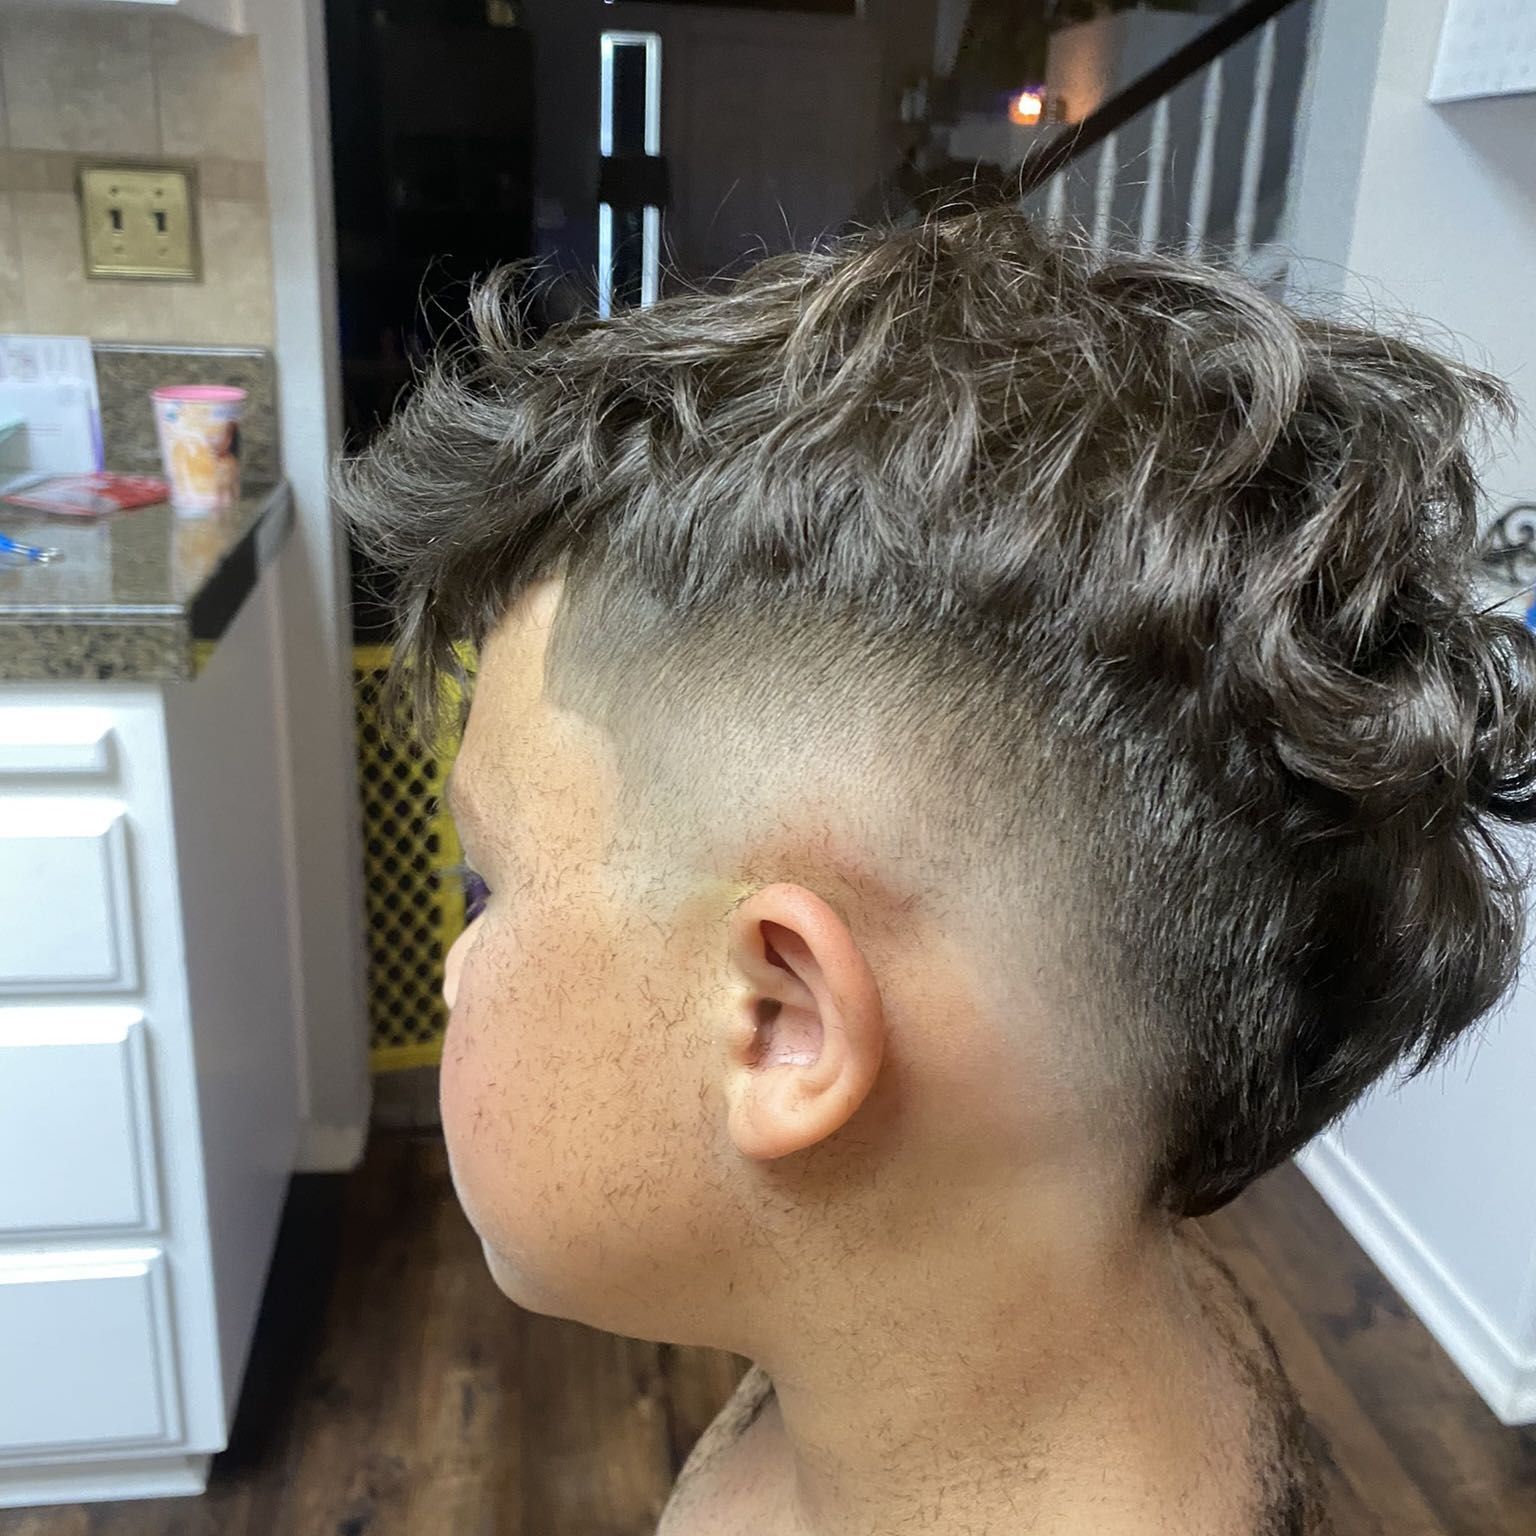 Kids cut with clippers 🙏🏽 portfolio